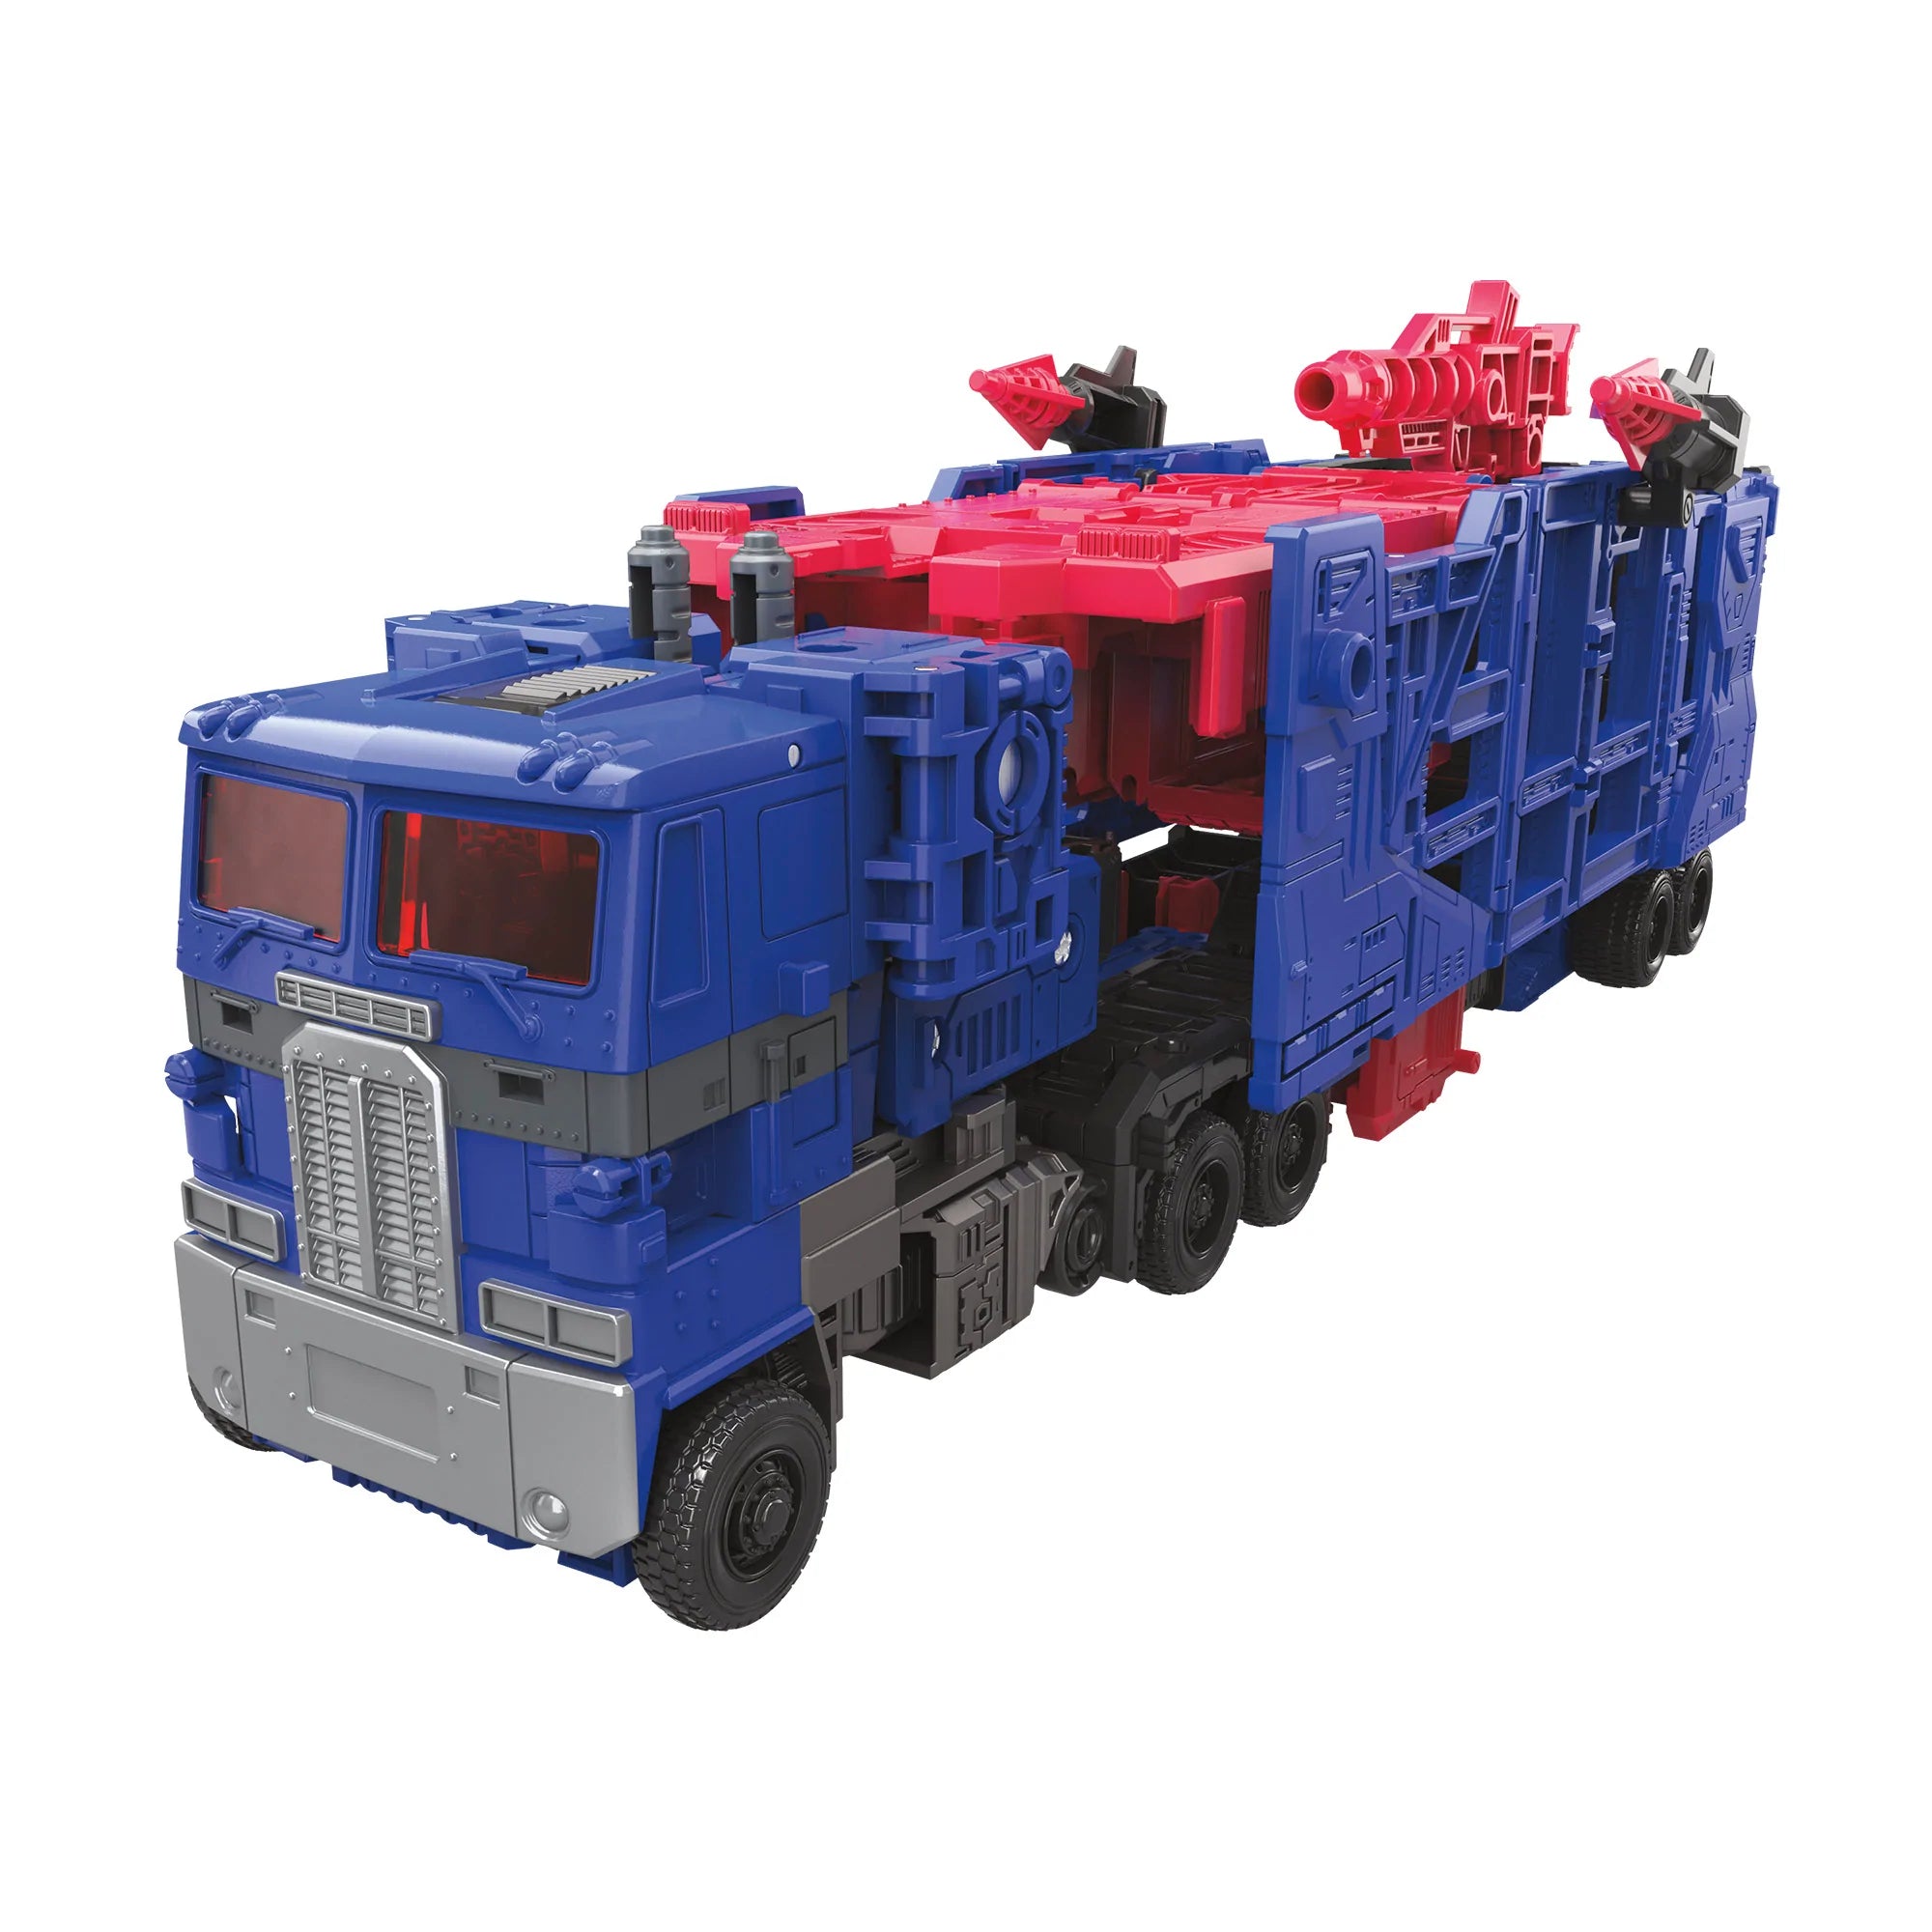 Hasbro - Transformers Generations - Shattered Glass Collection - Leader - Ultra Magnus - Marvelous Toys